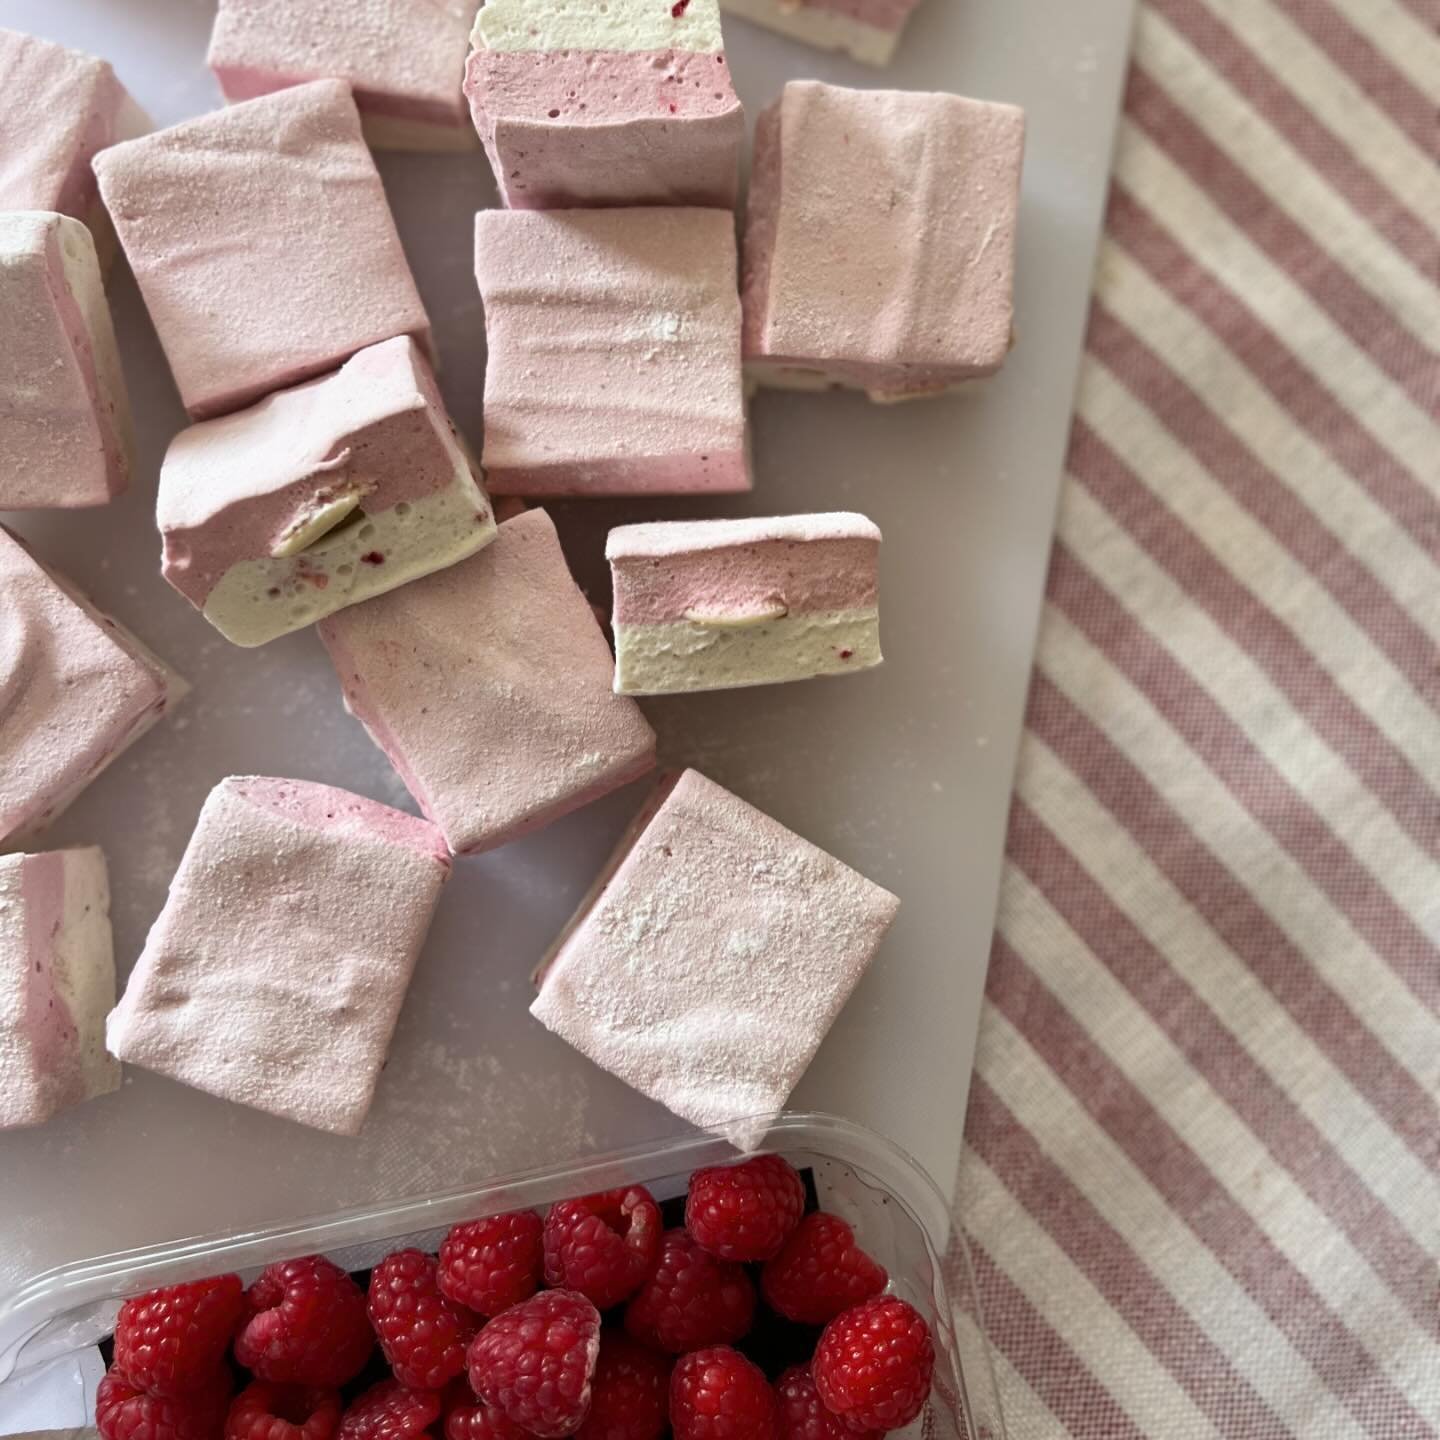 Some flavours put an instant smile on your face, so our Raspberry &amp; White Chocolate is getting another spot on the grid. It&rsquo;s the last day of April and while the weather has regressed to stormy January behaviour, here&rsquo;s a little remin